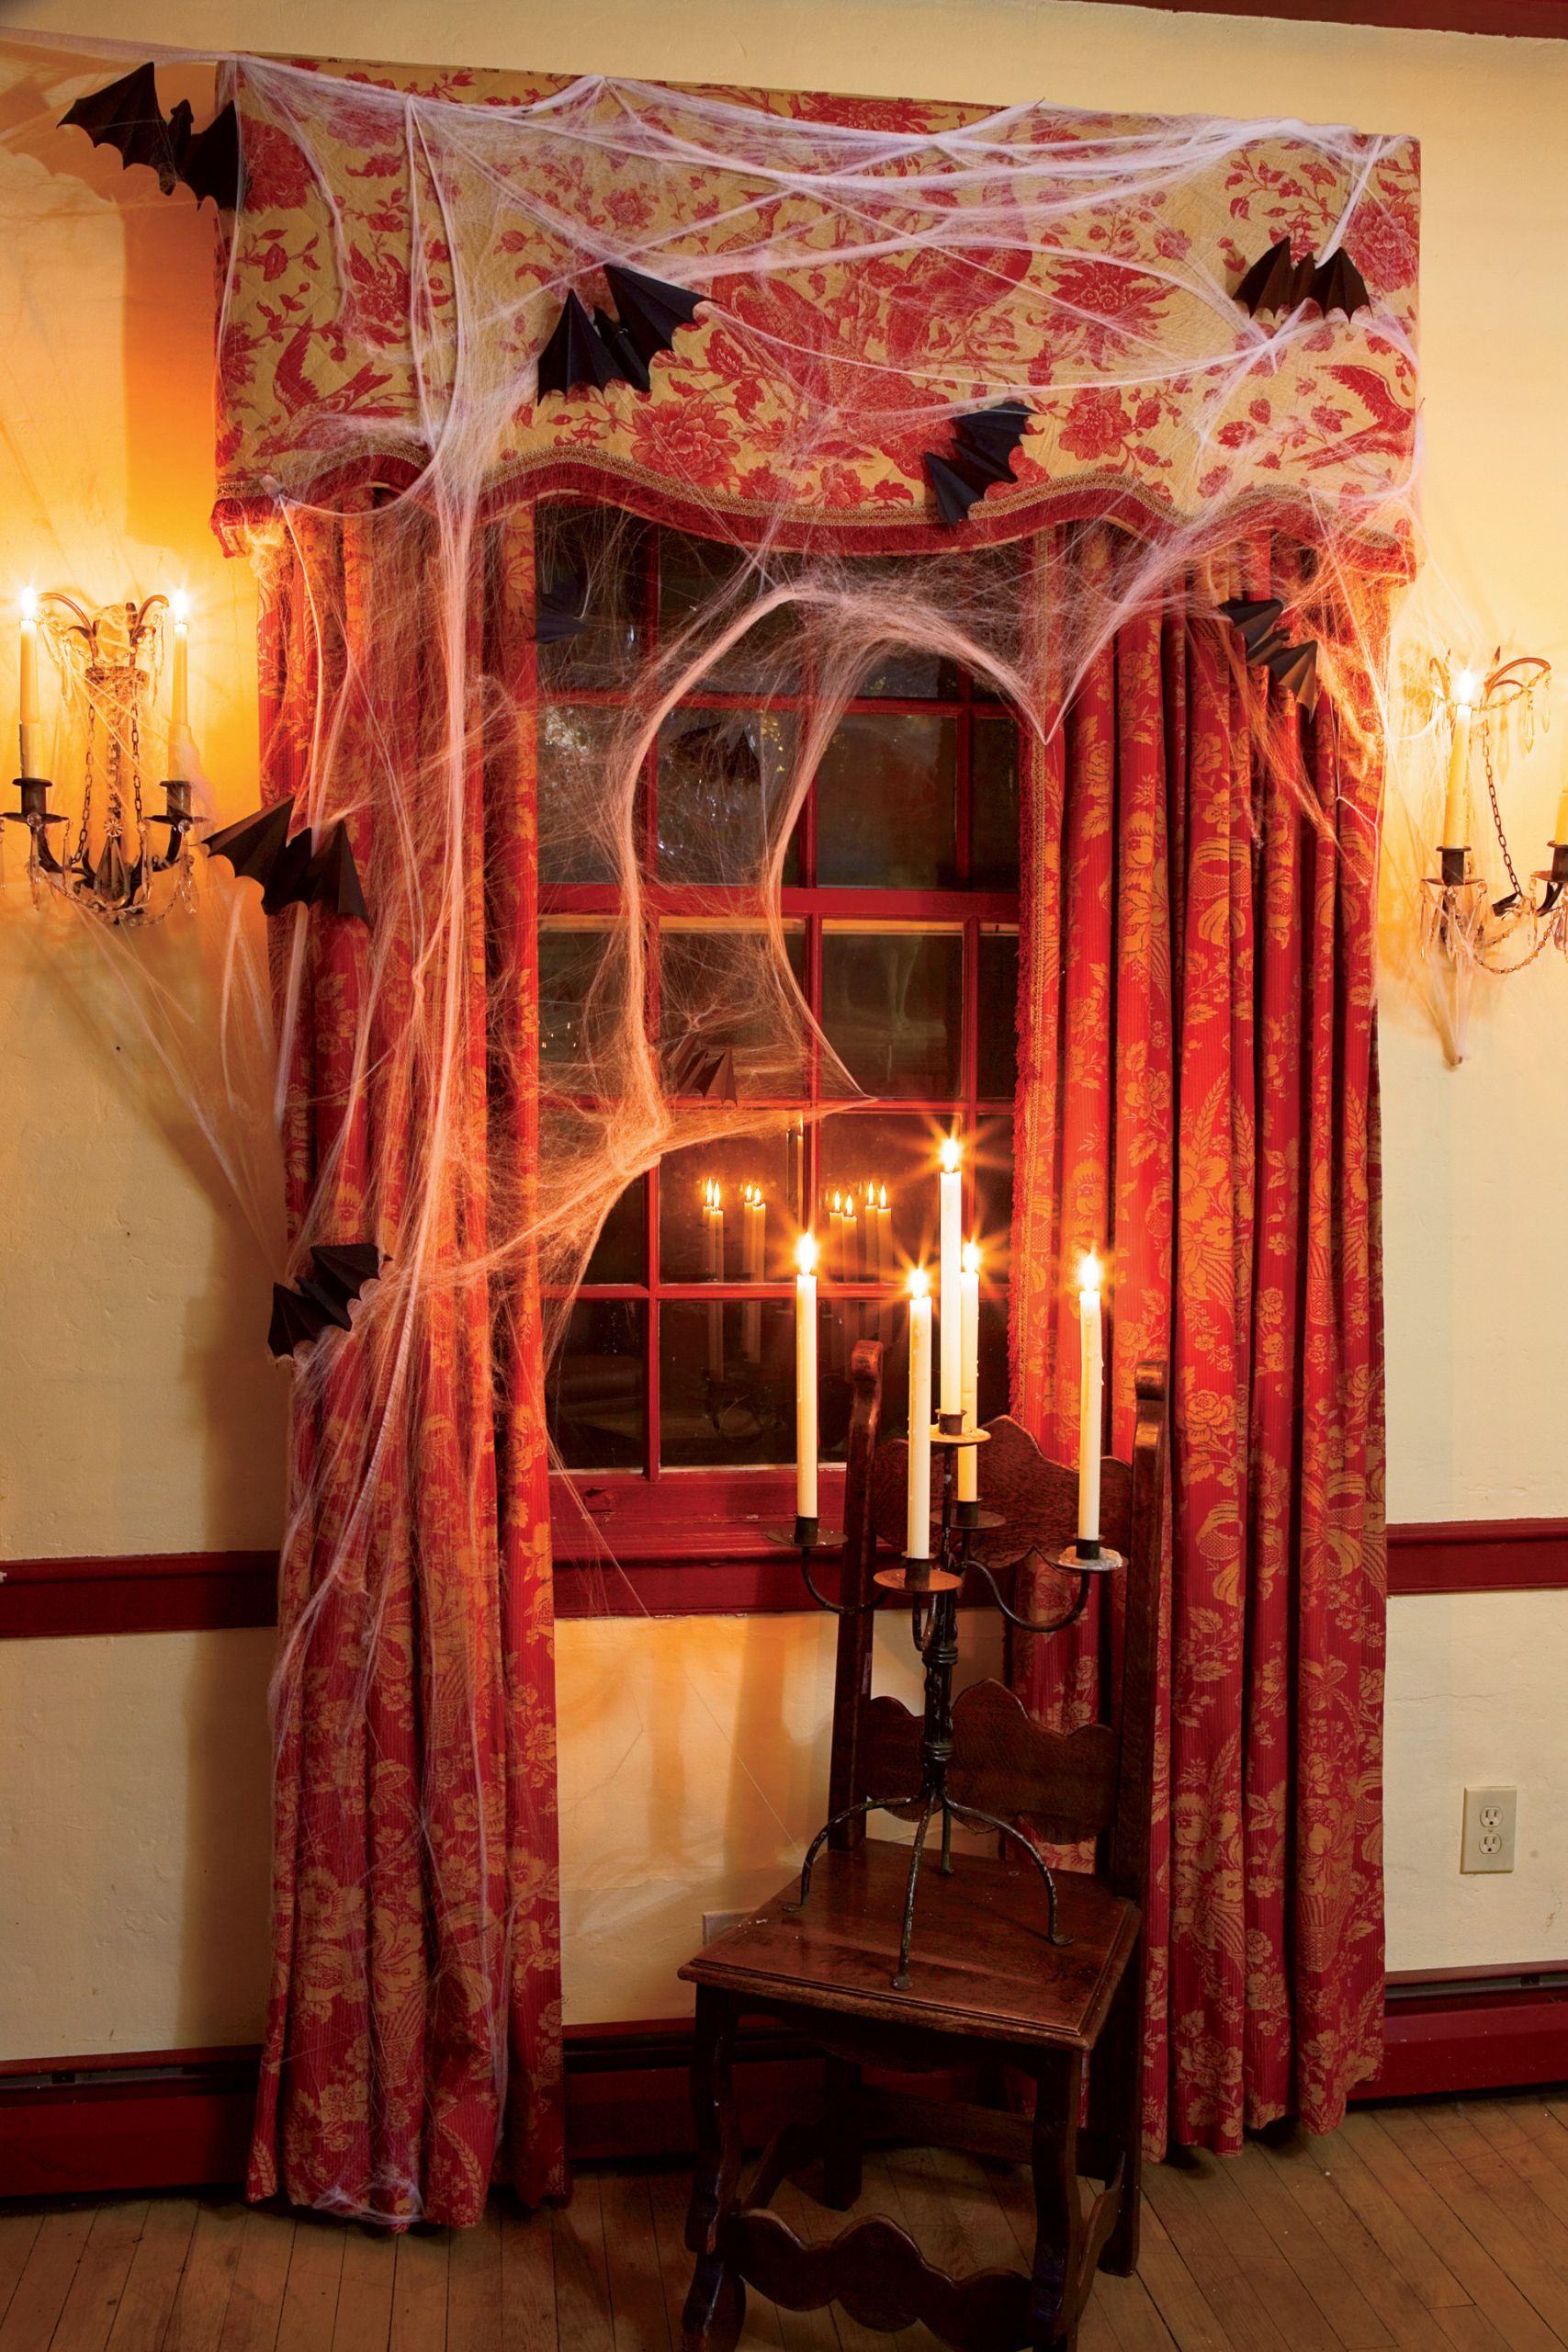 Halloween Party House Decorating Ideas
 50 Halloween Party Ideas Ideas For an Amazing Halloween